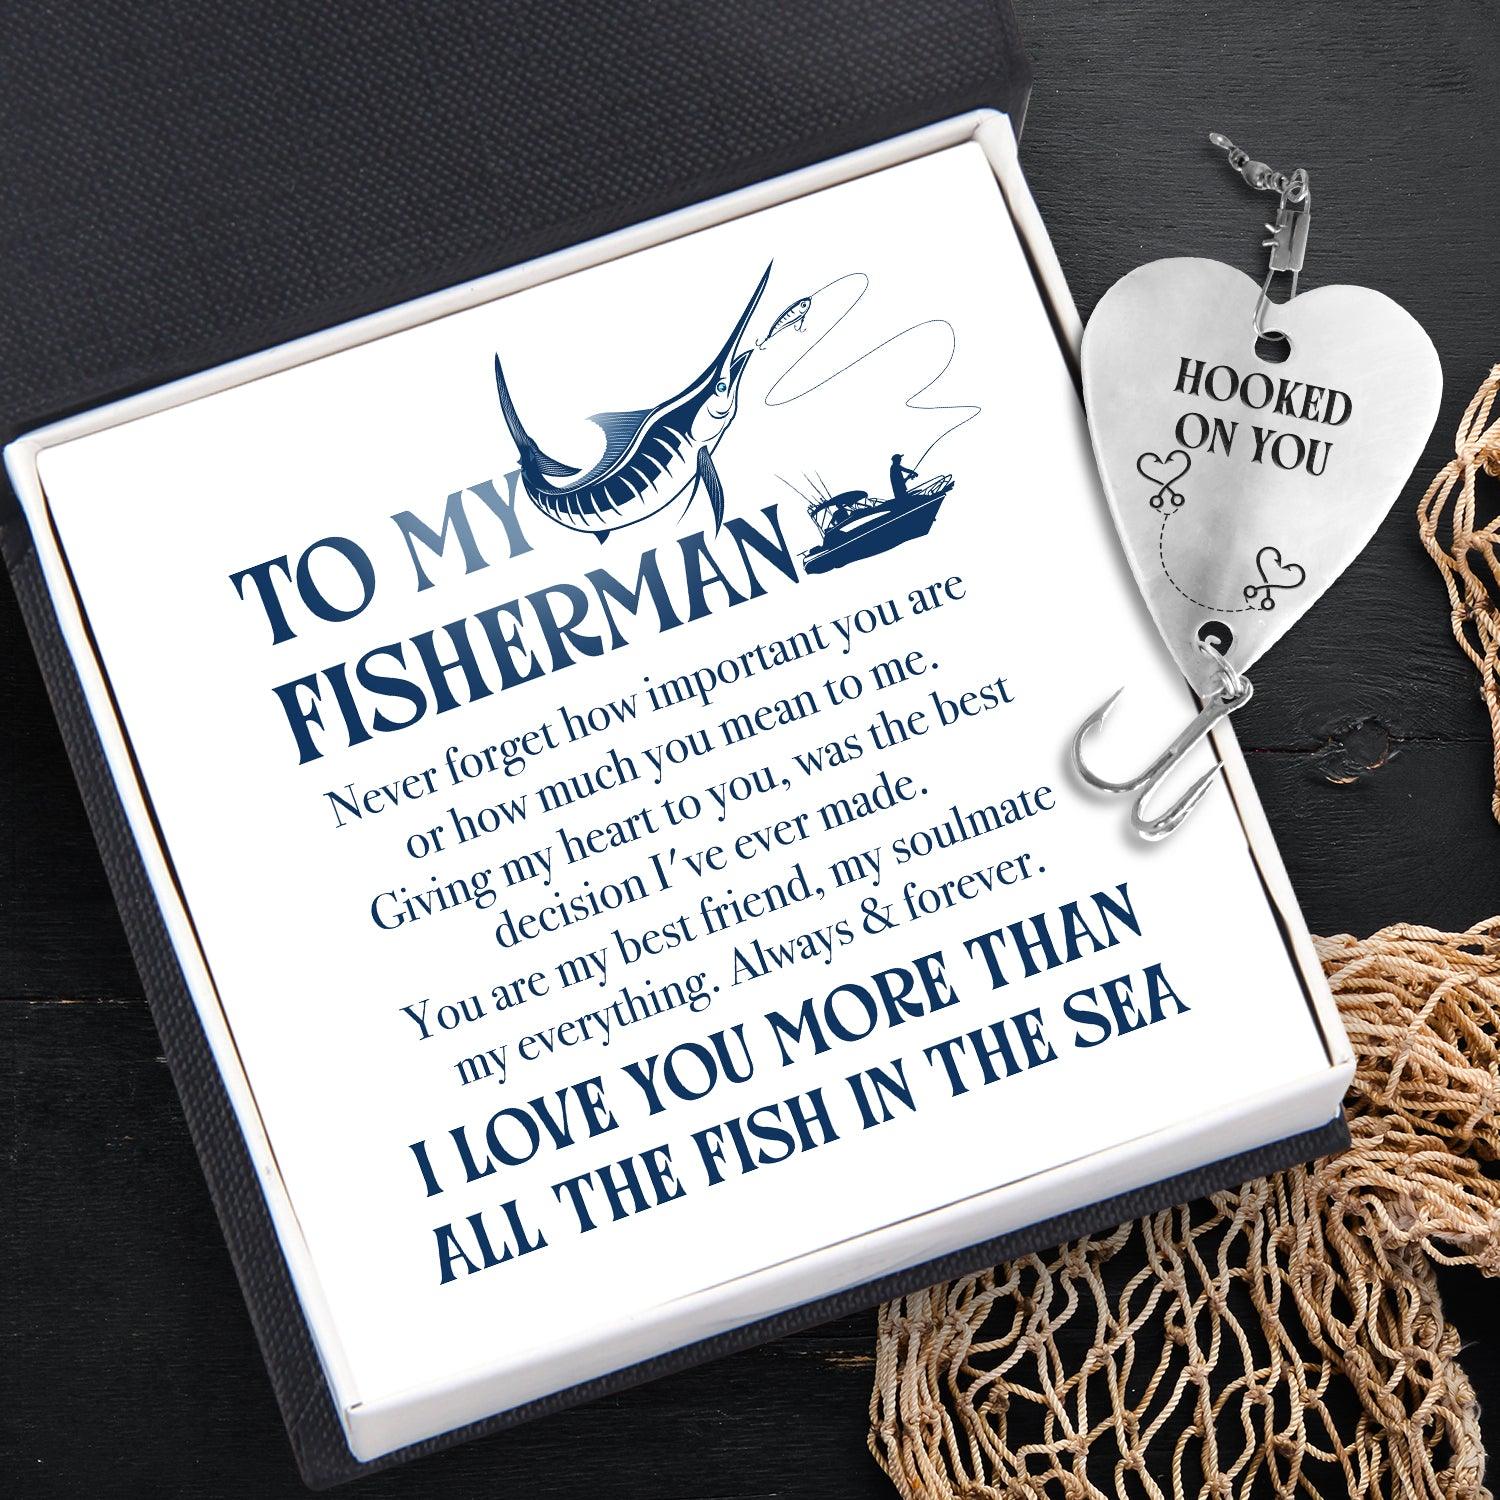 Heart Fishing Lure - Fishing - To My Man - I Love You More Than All The Fish In The Sea - Augfc26003 - Gifts Holder